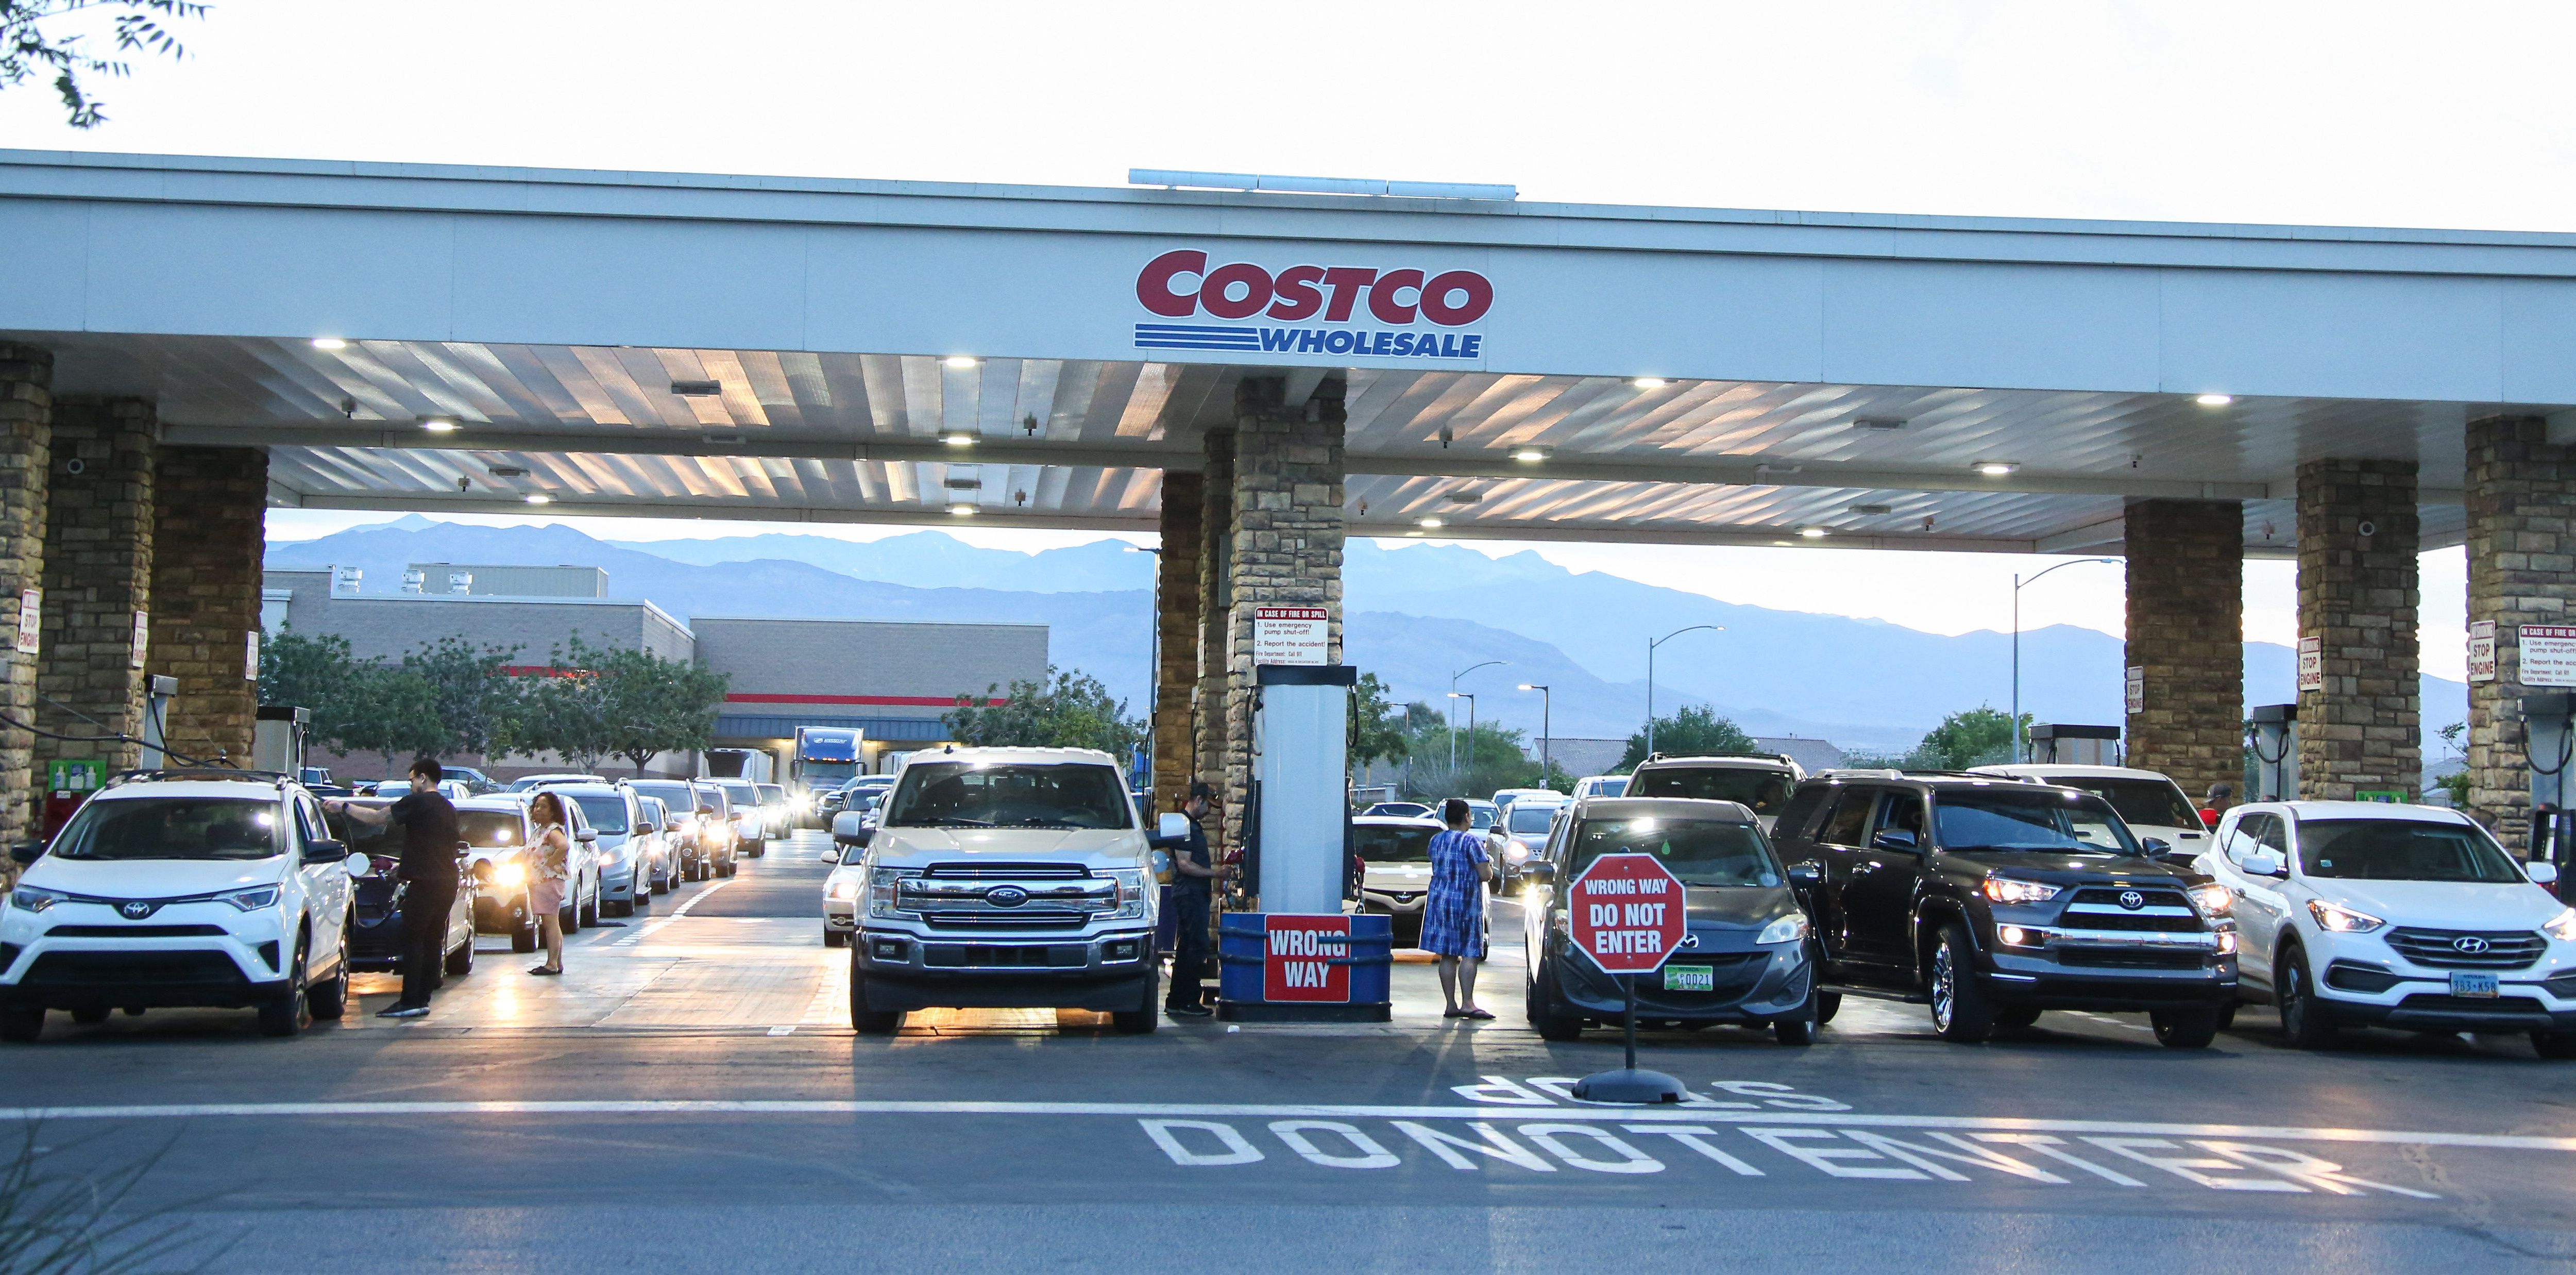 Costco gas station with cars lined up